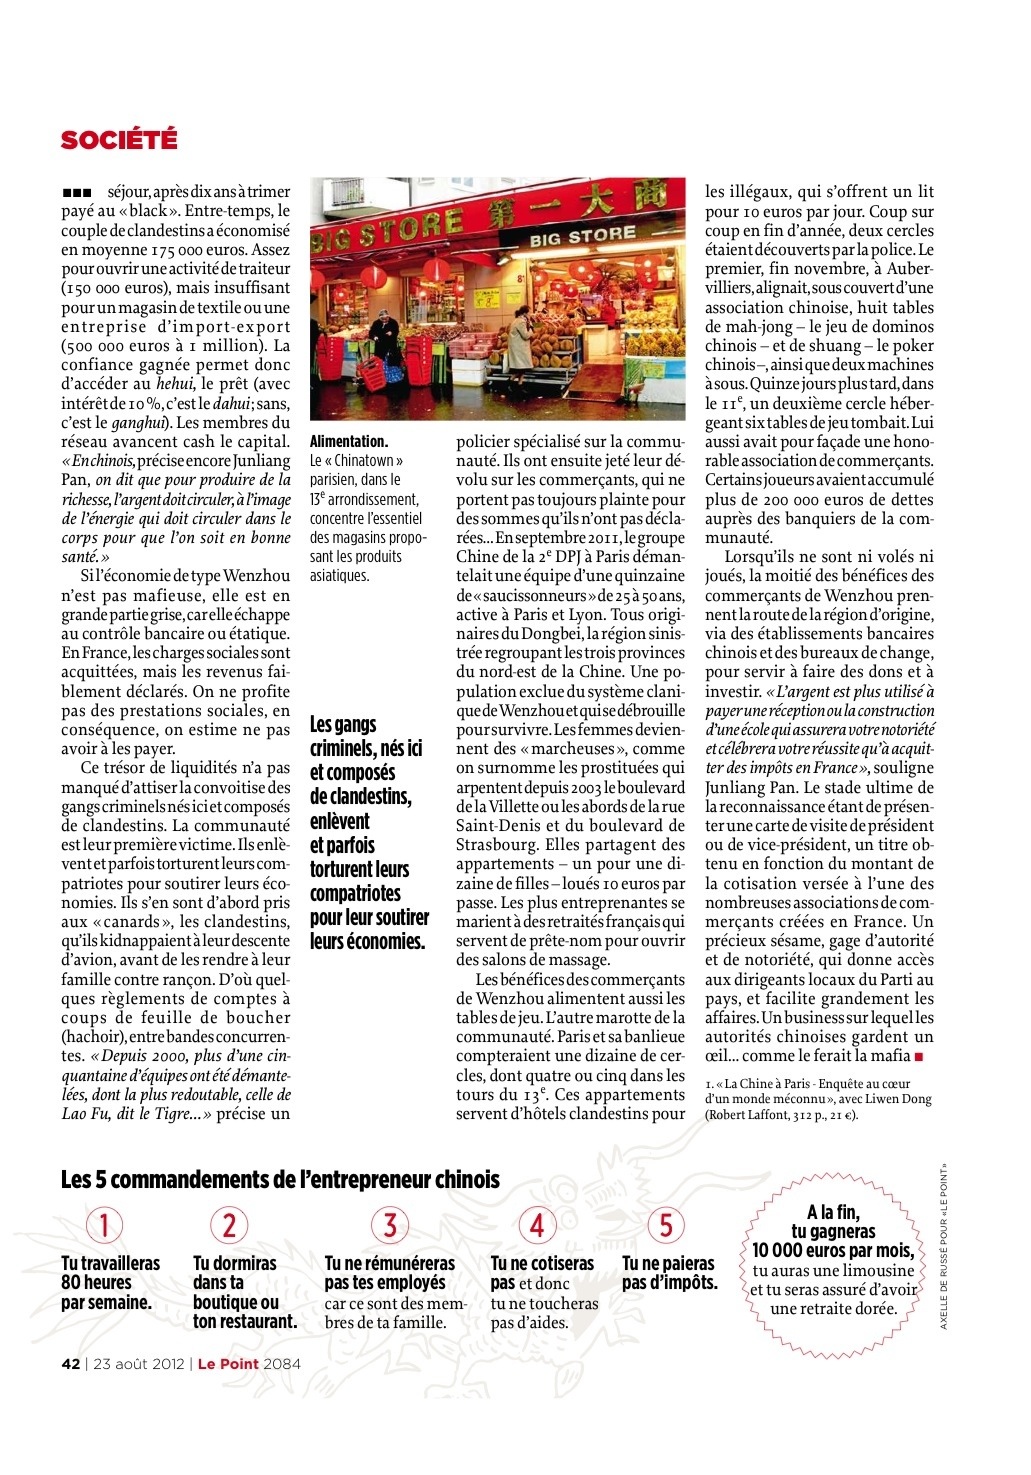 chinois-lepoint-3.jpg